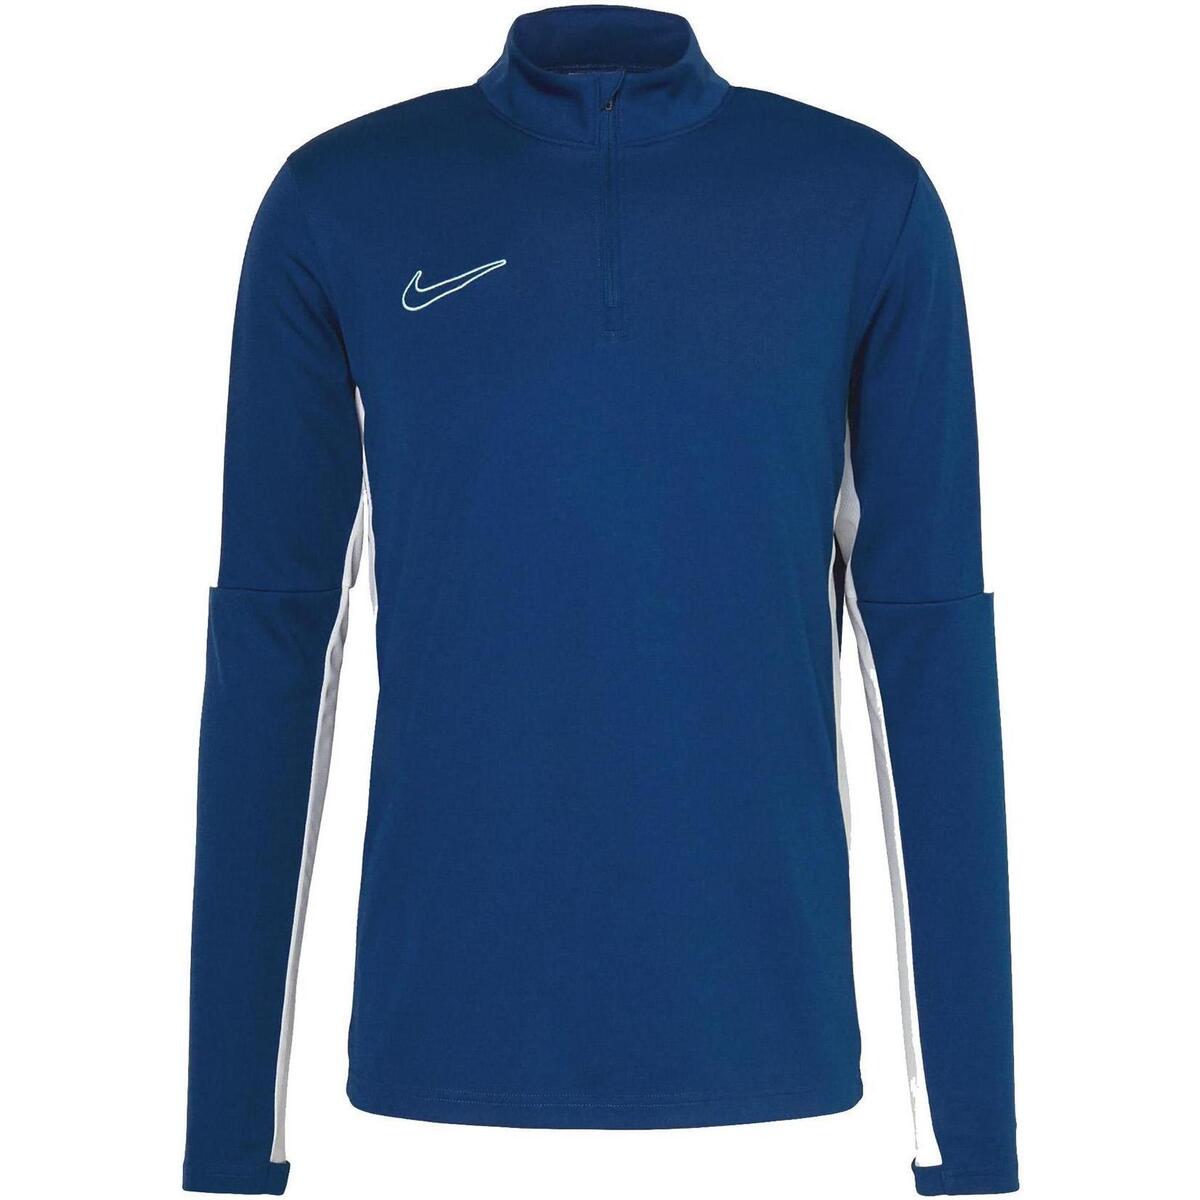 Nike M nk df acd23 dril top br 27691056 1200 A